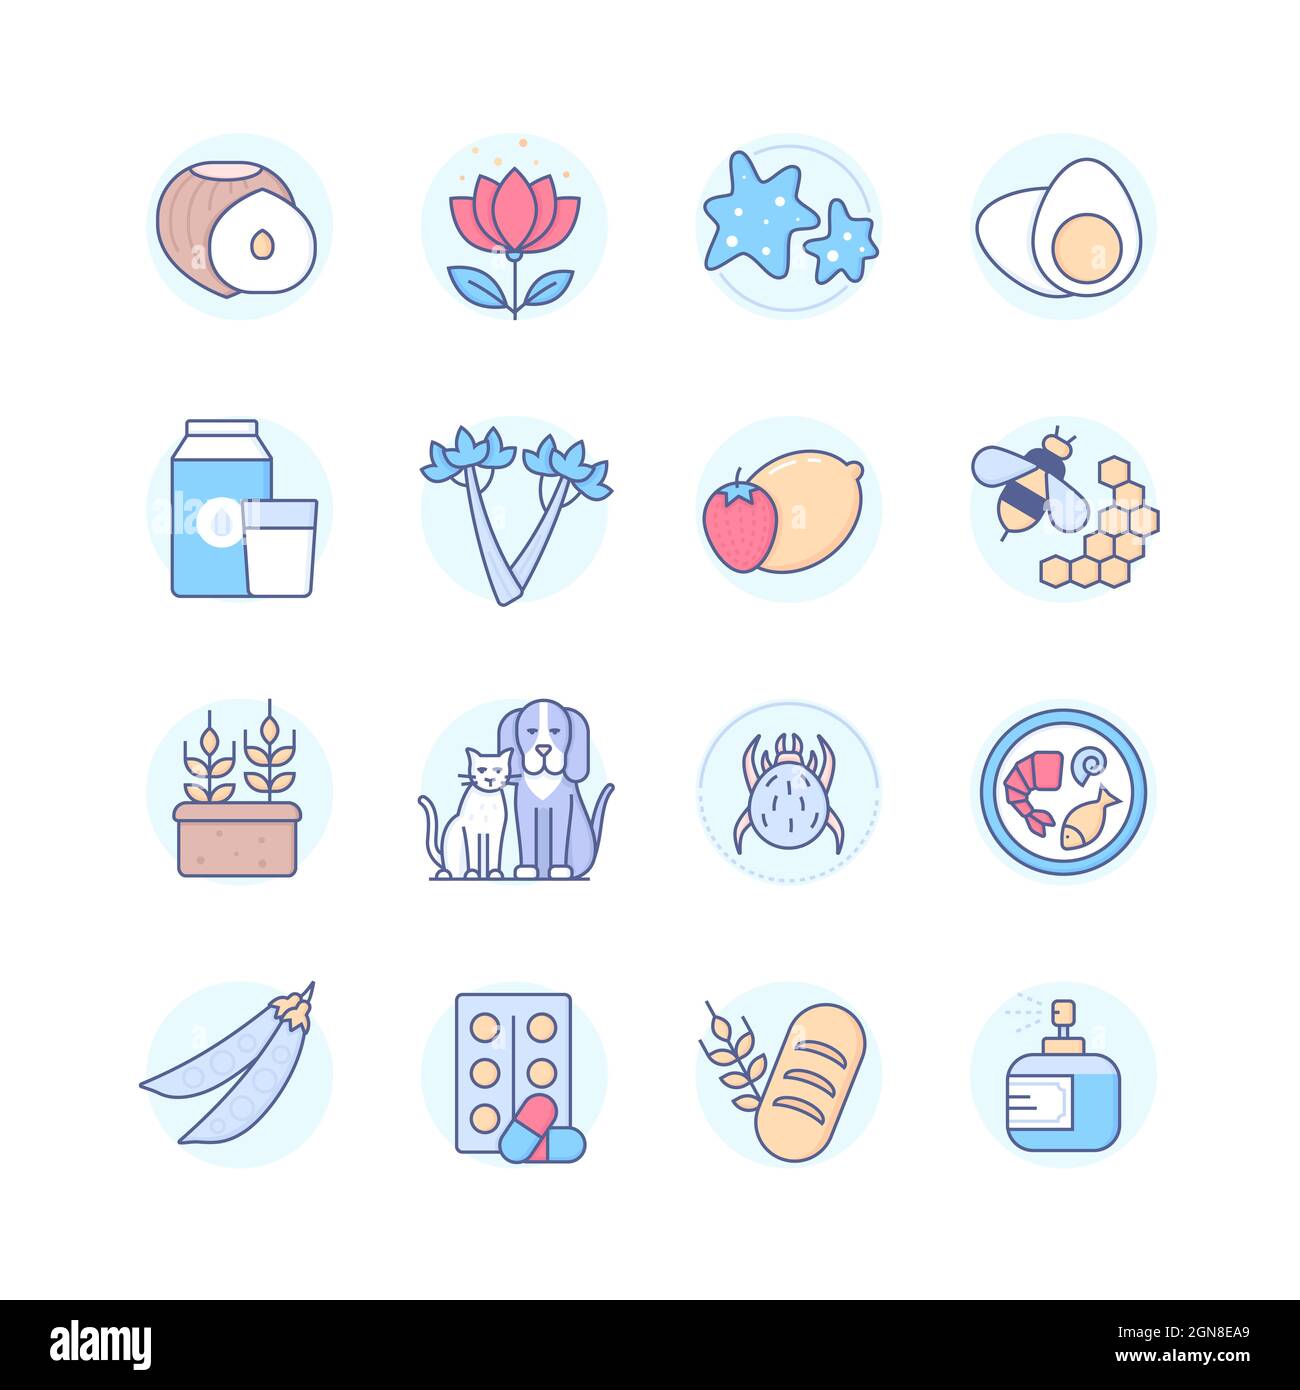 Allergens - colorful line design style icon set. Products and food that provoke allergic reactions. Nuts, pollen, mold, eggs, lactose, celery, fruits, Stock Vector